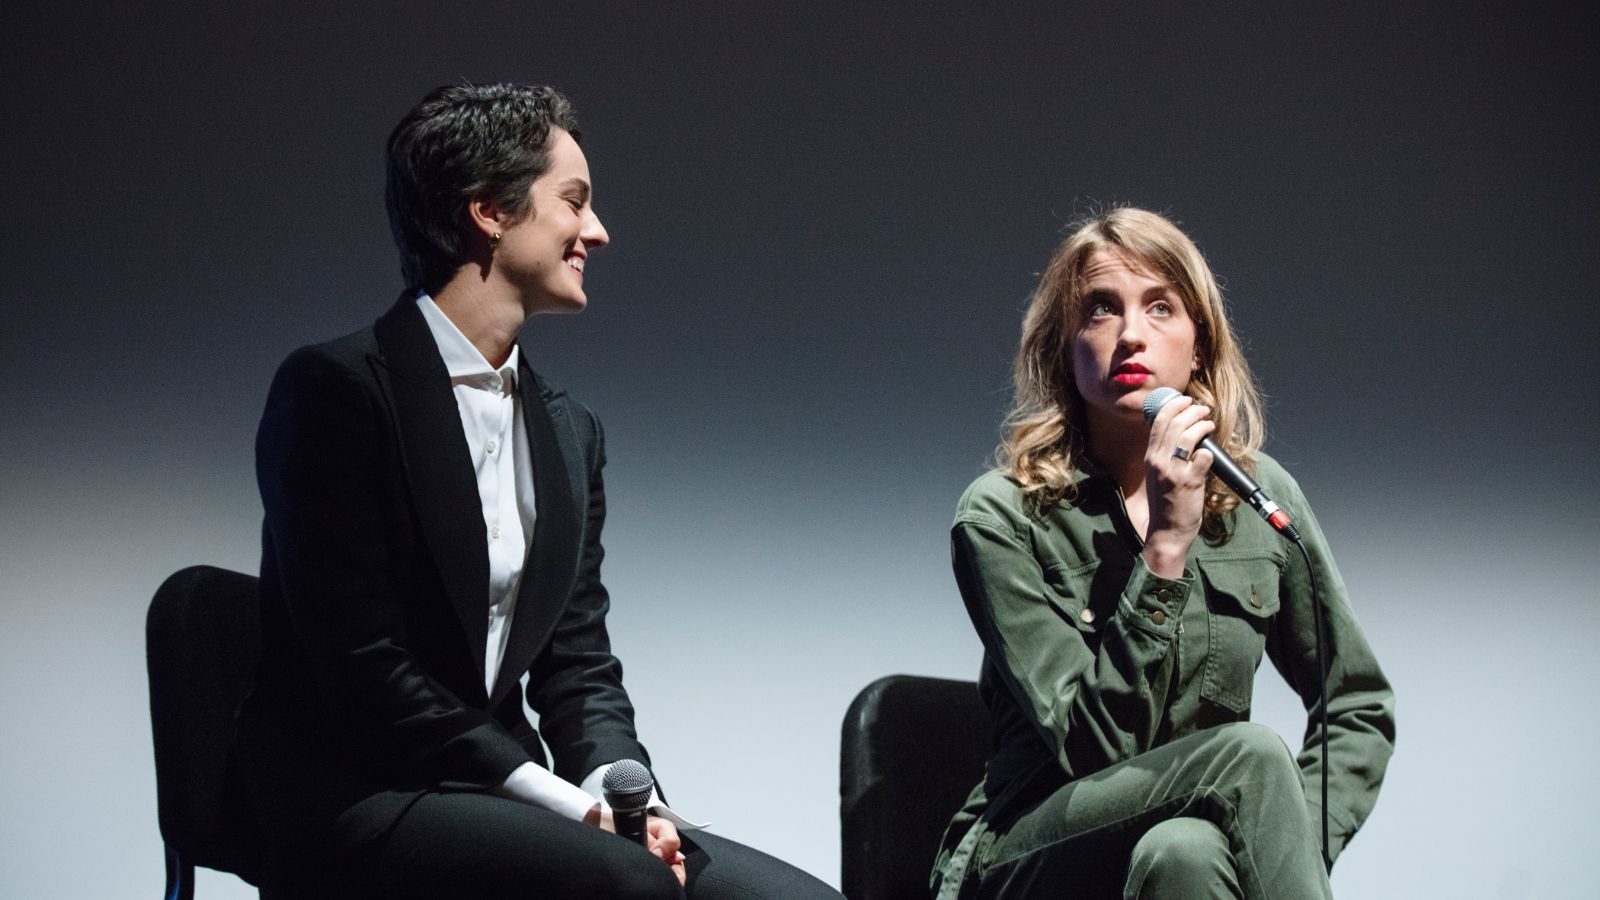 Noemie Merlant on Portrait of a Lady on Fire at London Film Festival  premiere interview 